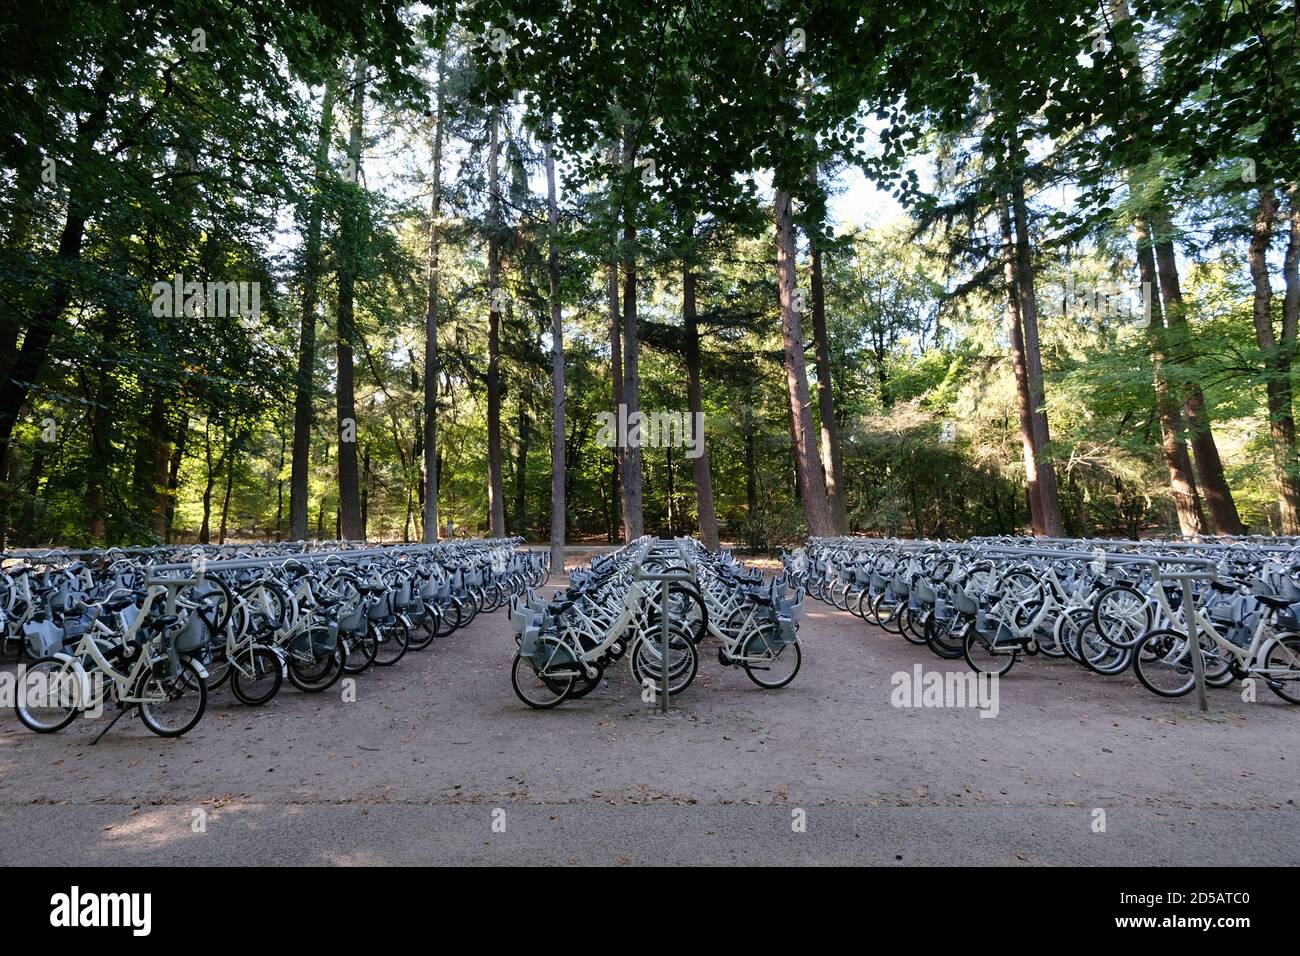 Bicycle parking at the entrance to De Hoge Veluwe National Park and the Kröller-Müller Museum near the village of Otterlo in the Netherlands. Stock Photo